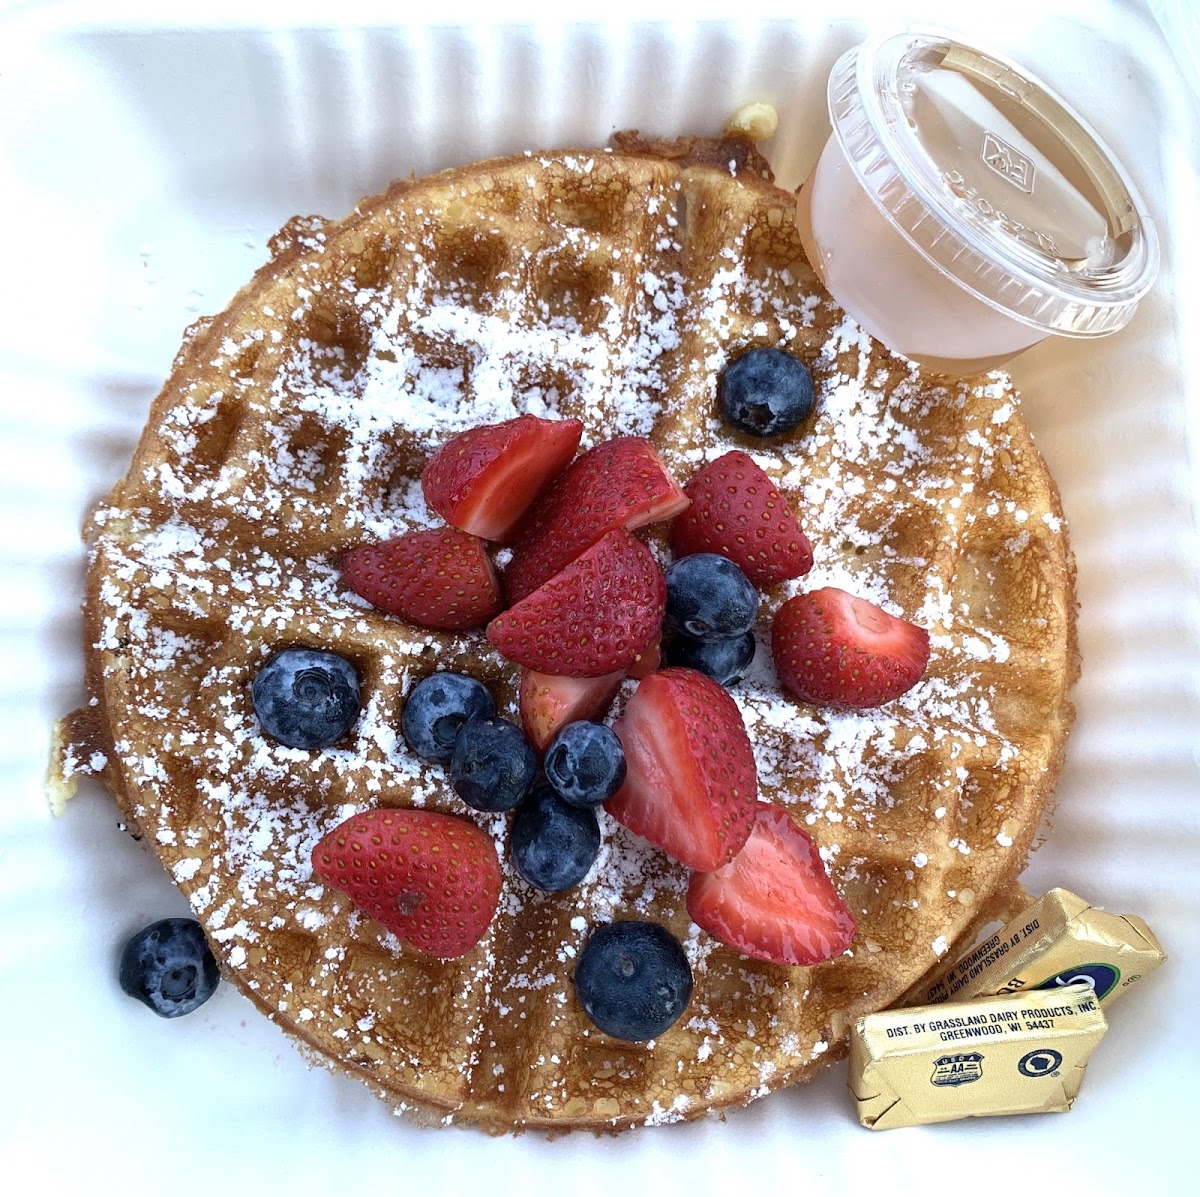 Gluten Free Waffle & Berries. Next I would request cream!